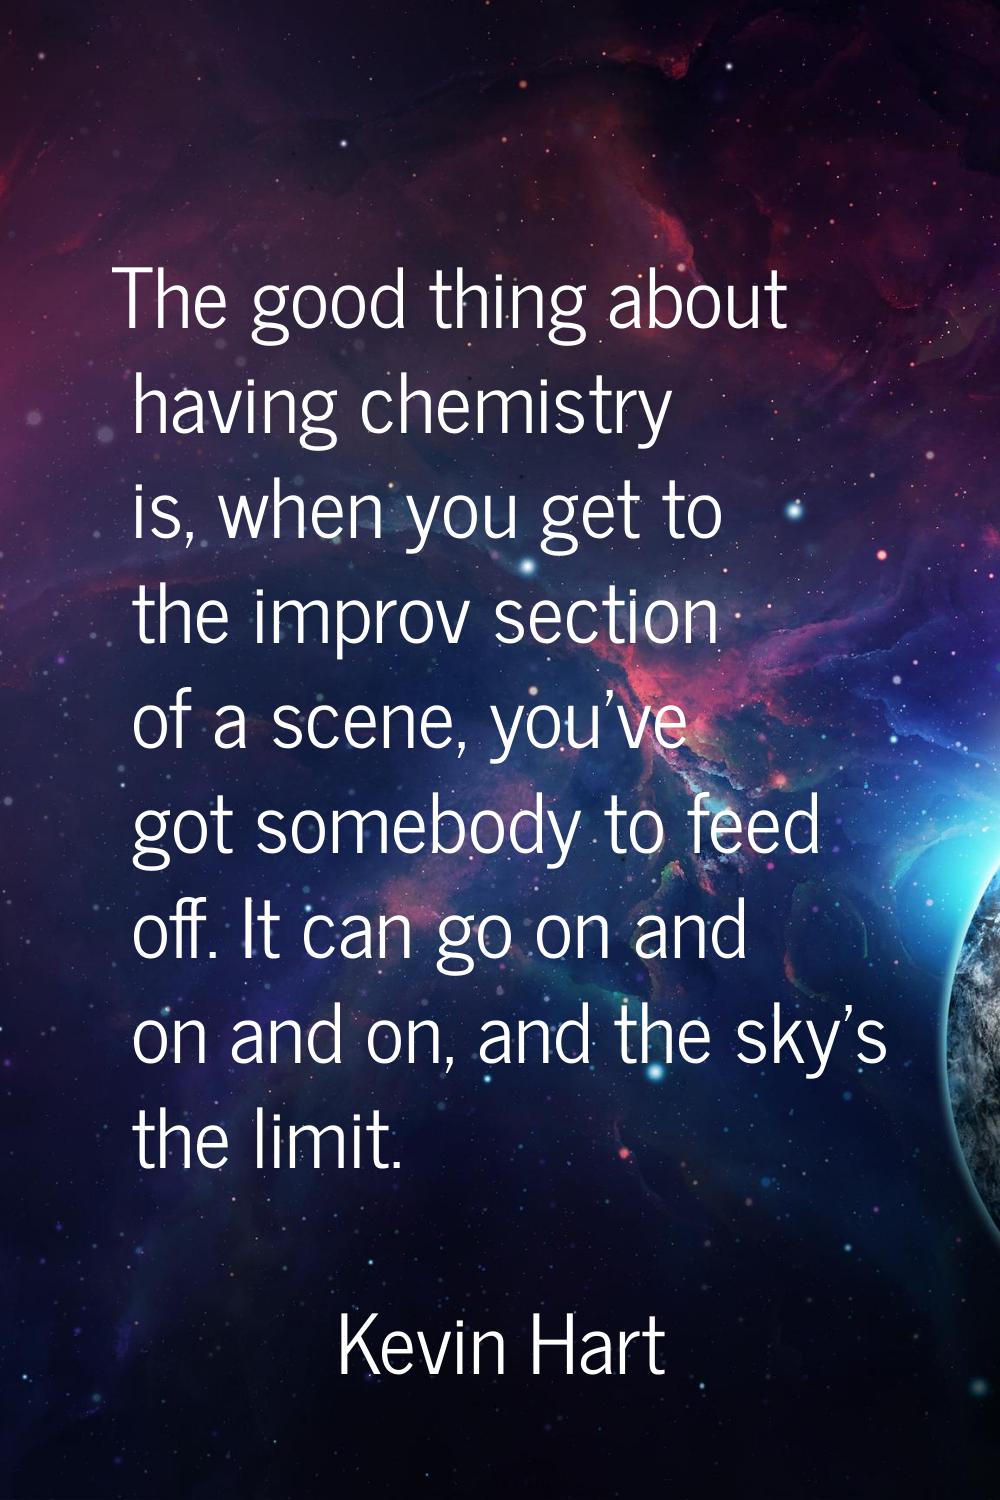 The good thing about having chemistry is, when you get to the improv section of a scene, you've got